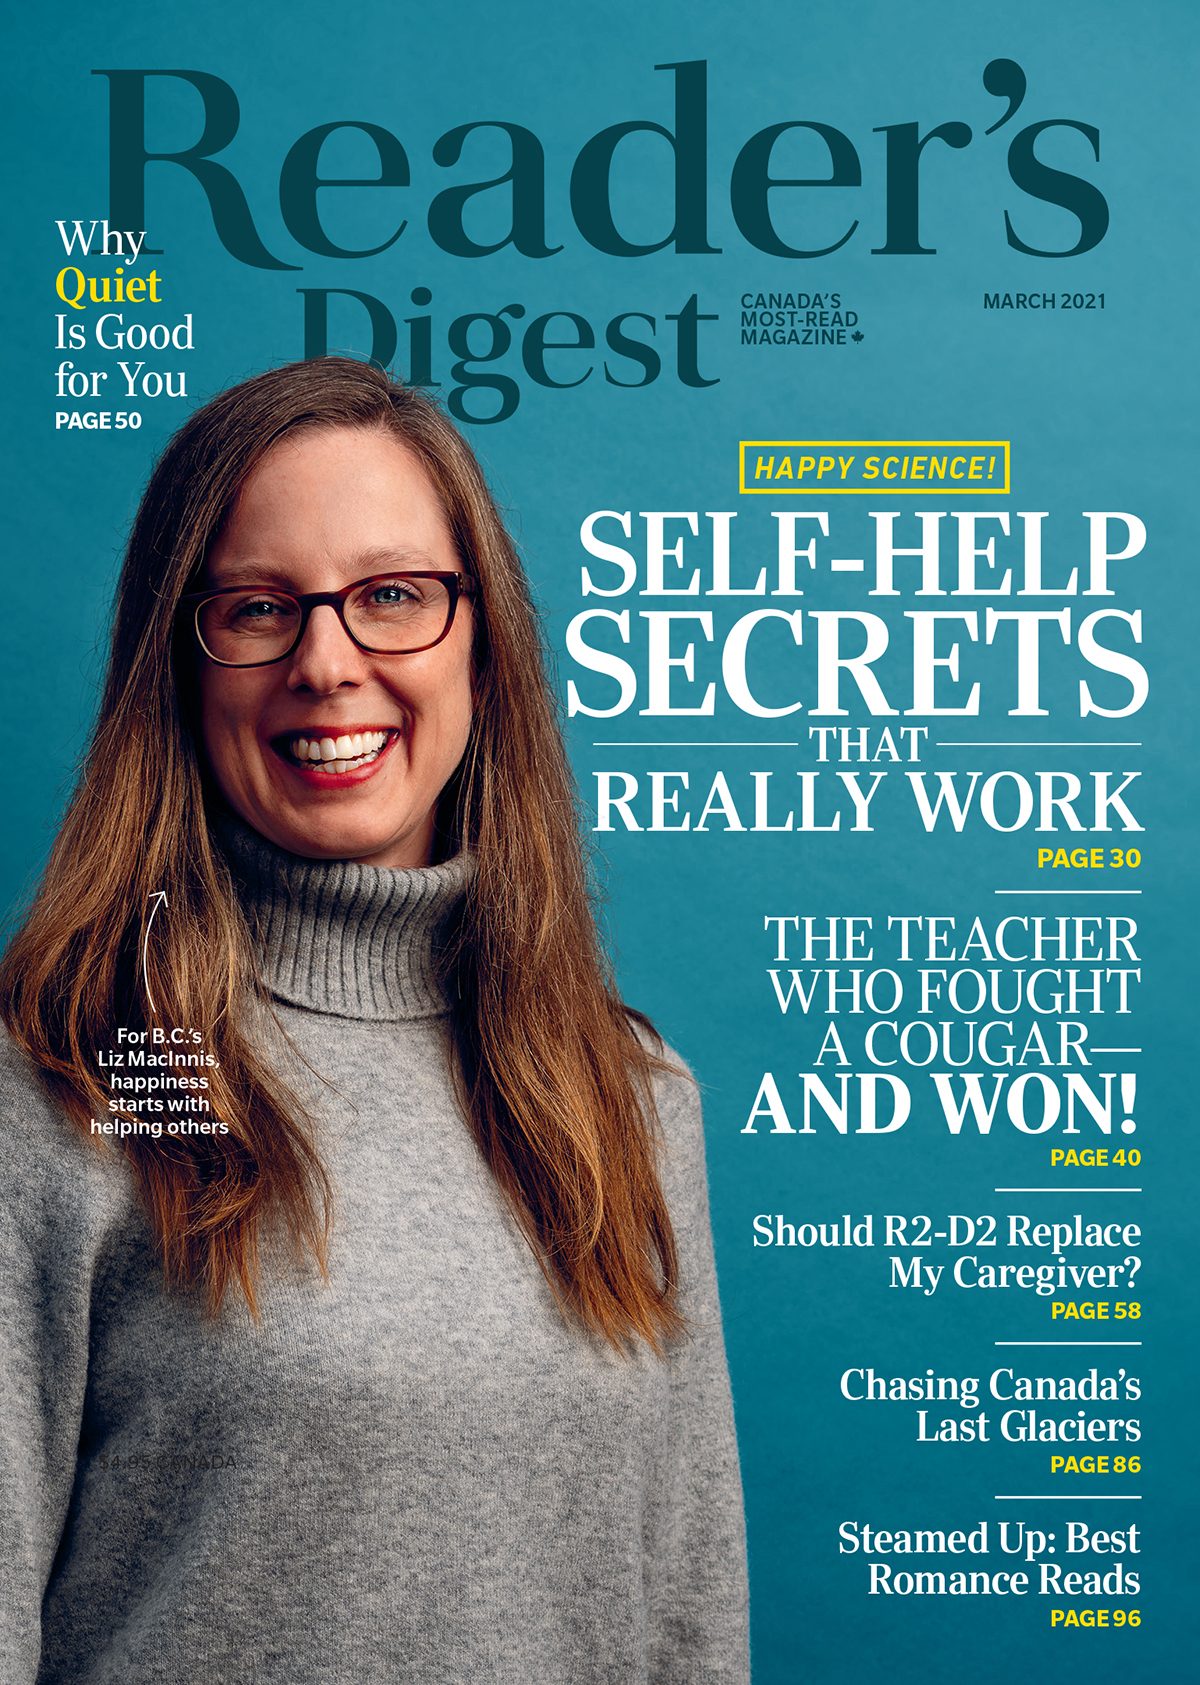 Inside the March 2021 Issue of Reader's Digest Canada Reader's Digest